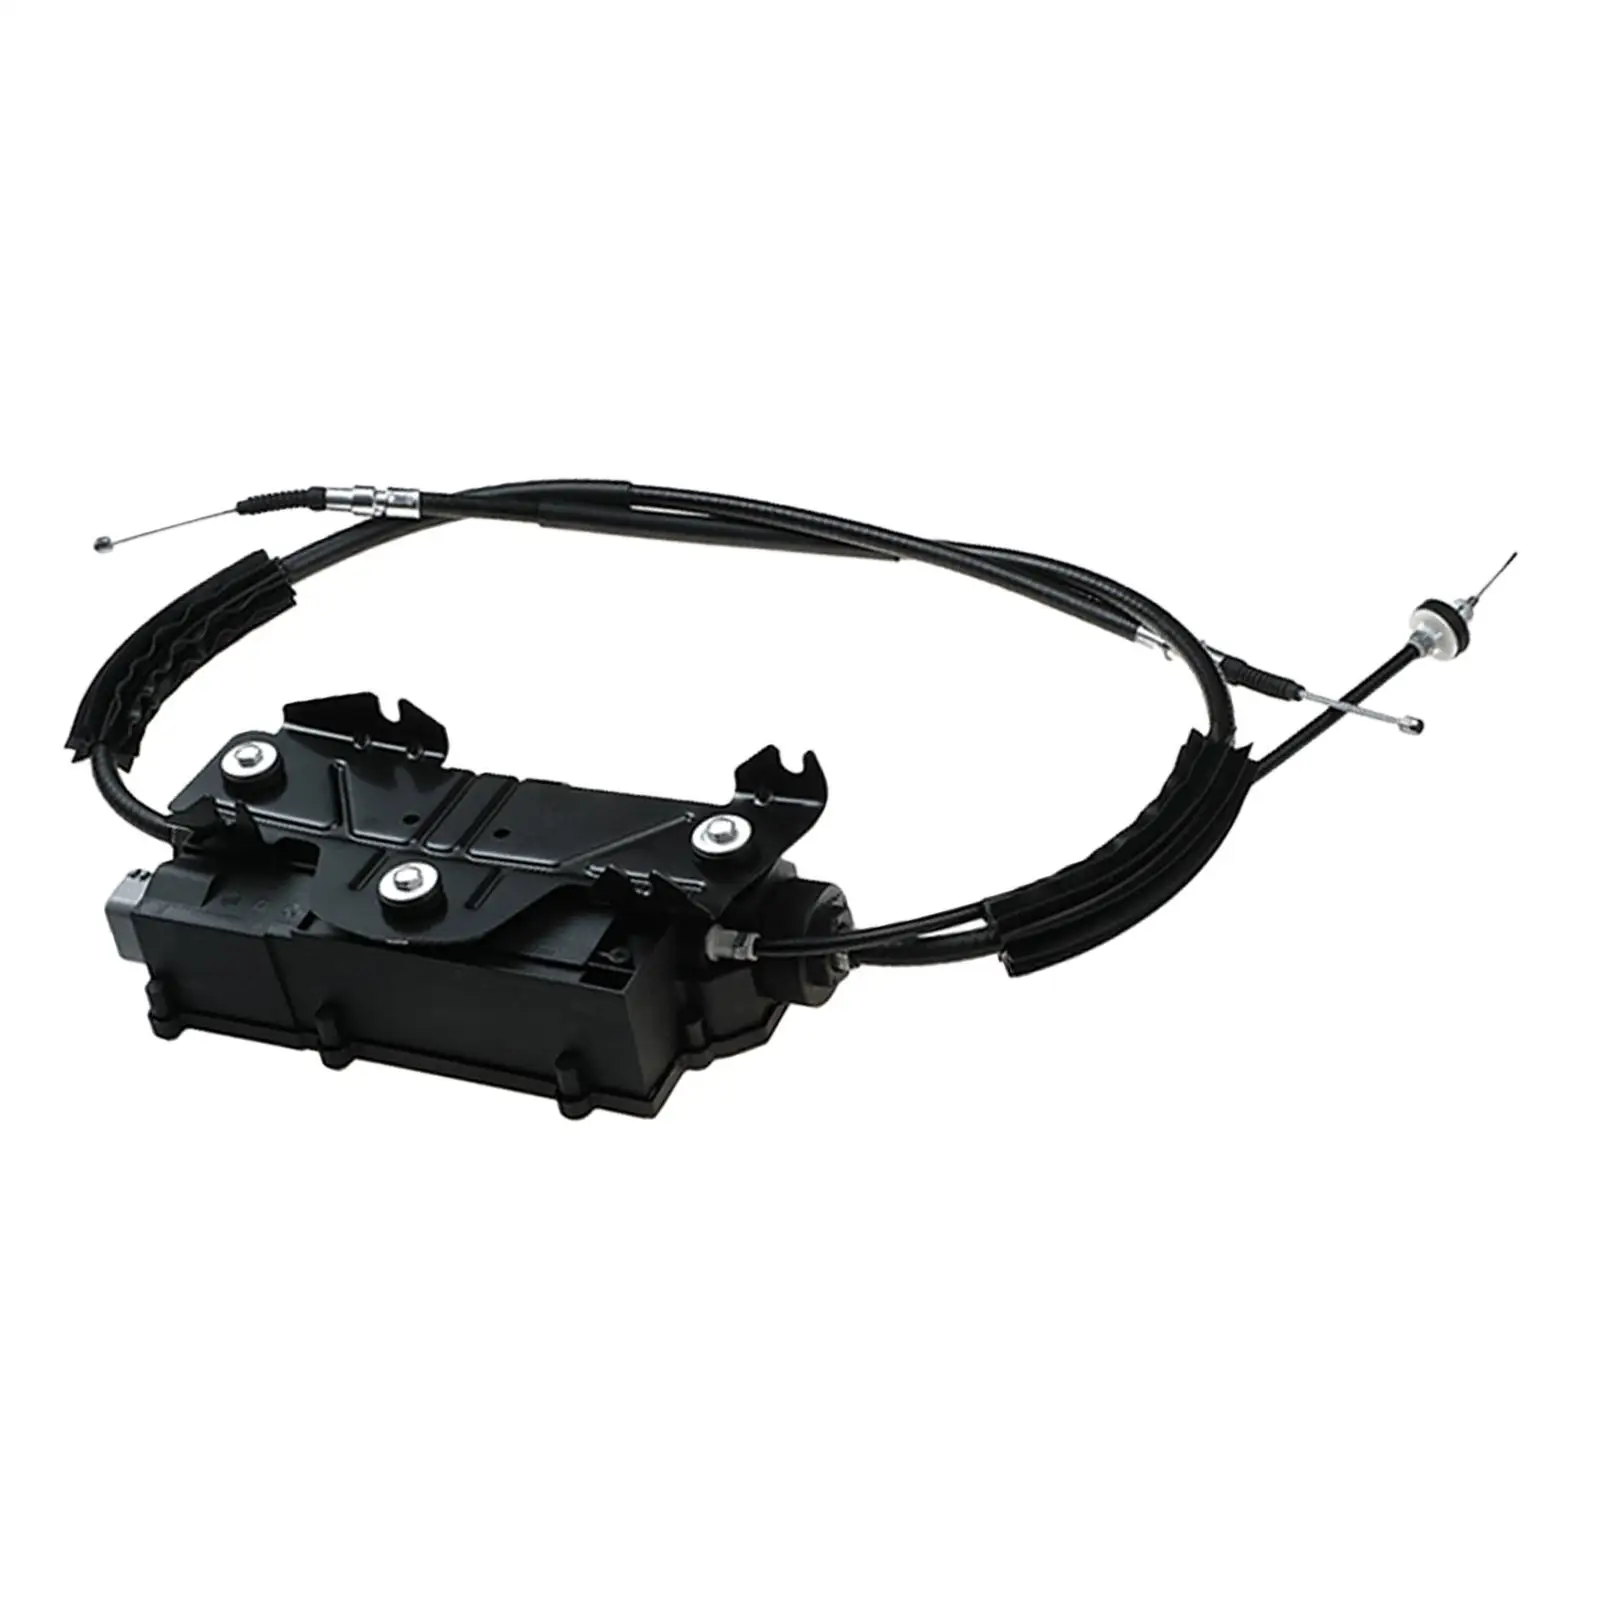 Park Brake Module, Hand Brake Actuator, Parking Brake Actuator with Control Unit, Fit for GT 09-16, Vehicle Replacement